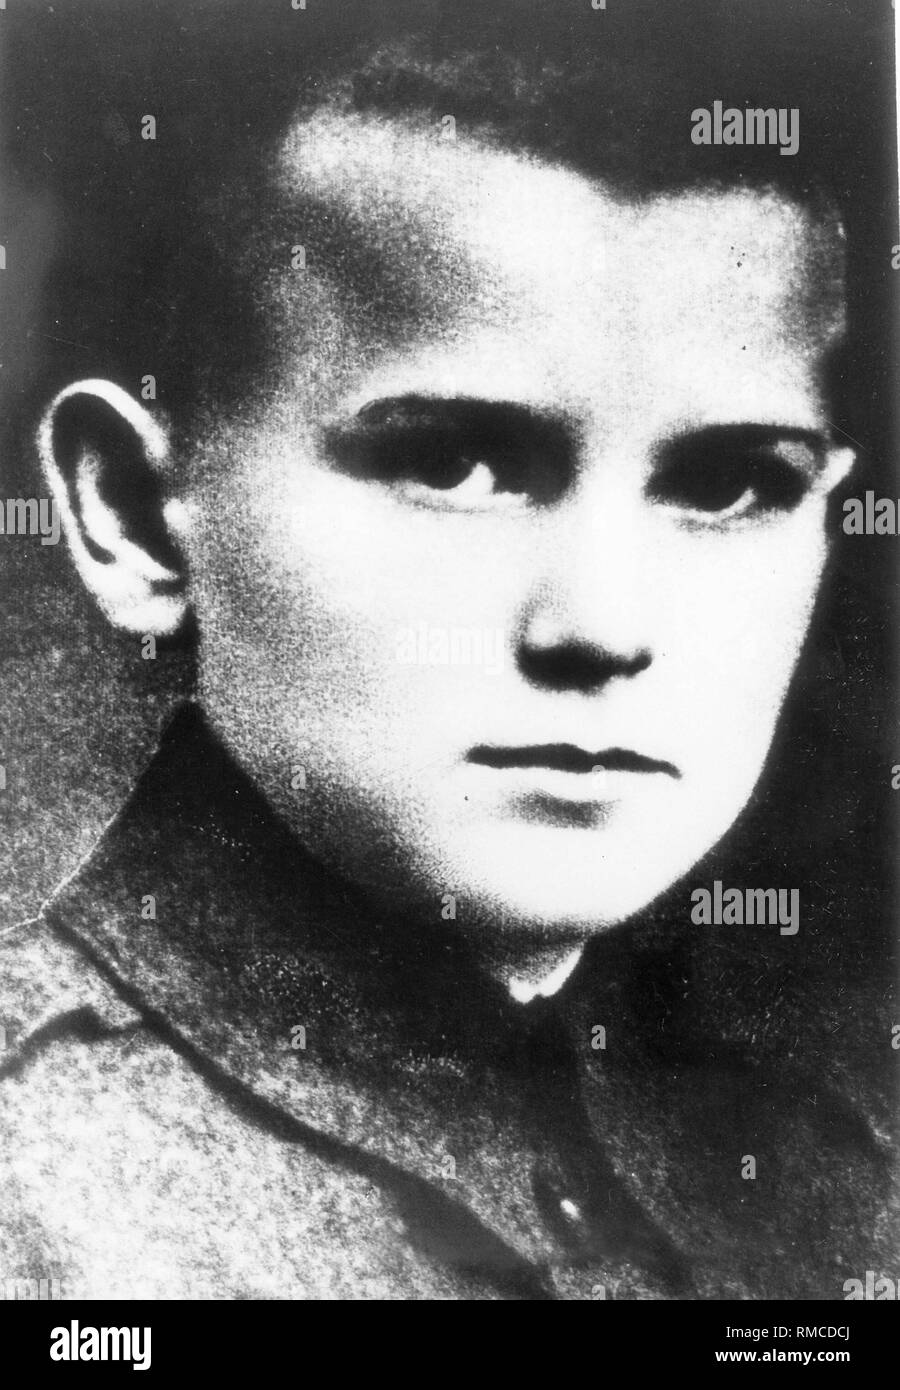 Karol Wojtyla, later Pope John Paul II, as a child at the age of 12. Stock Photo